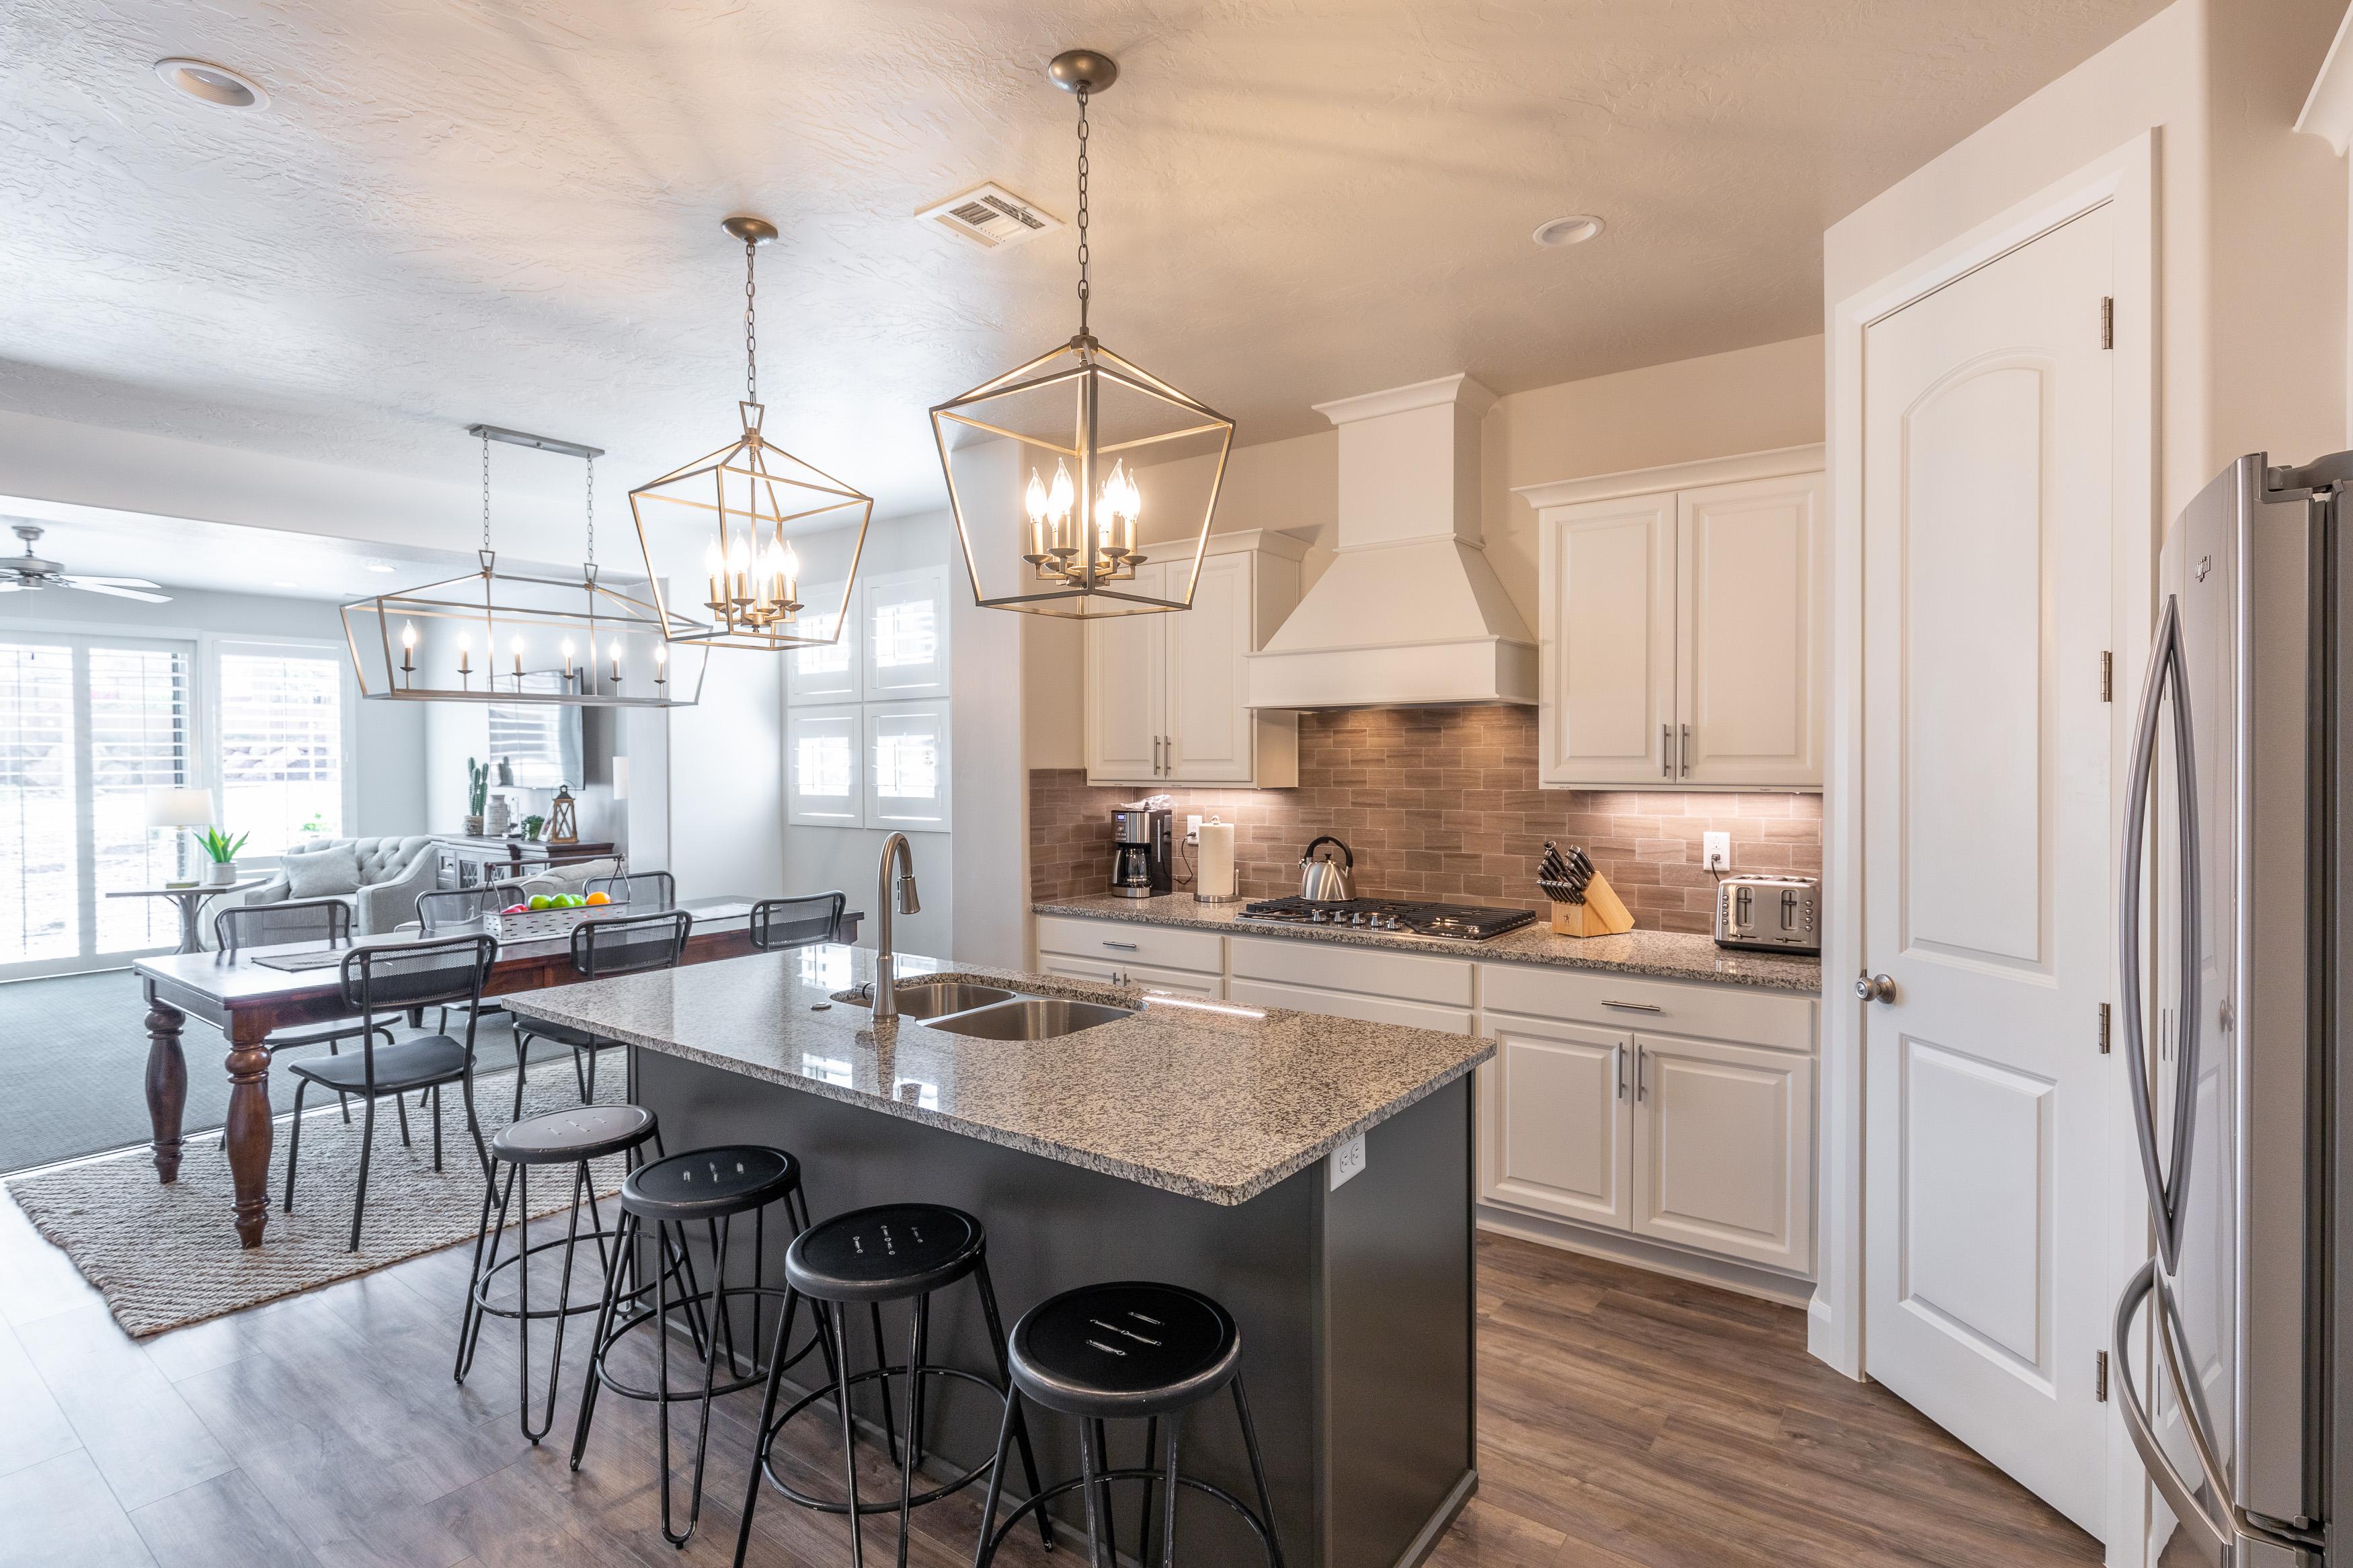 The Kitchen Island comfortably seats 4 adults and creates a great space for serving and preparing meals. 